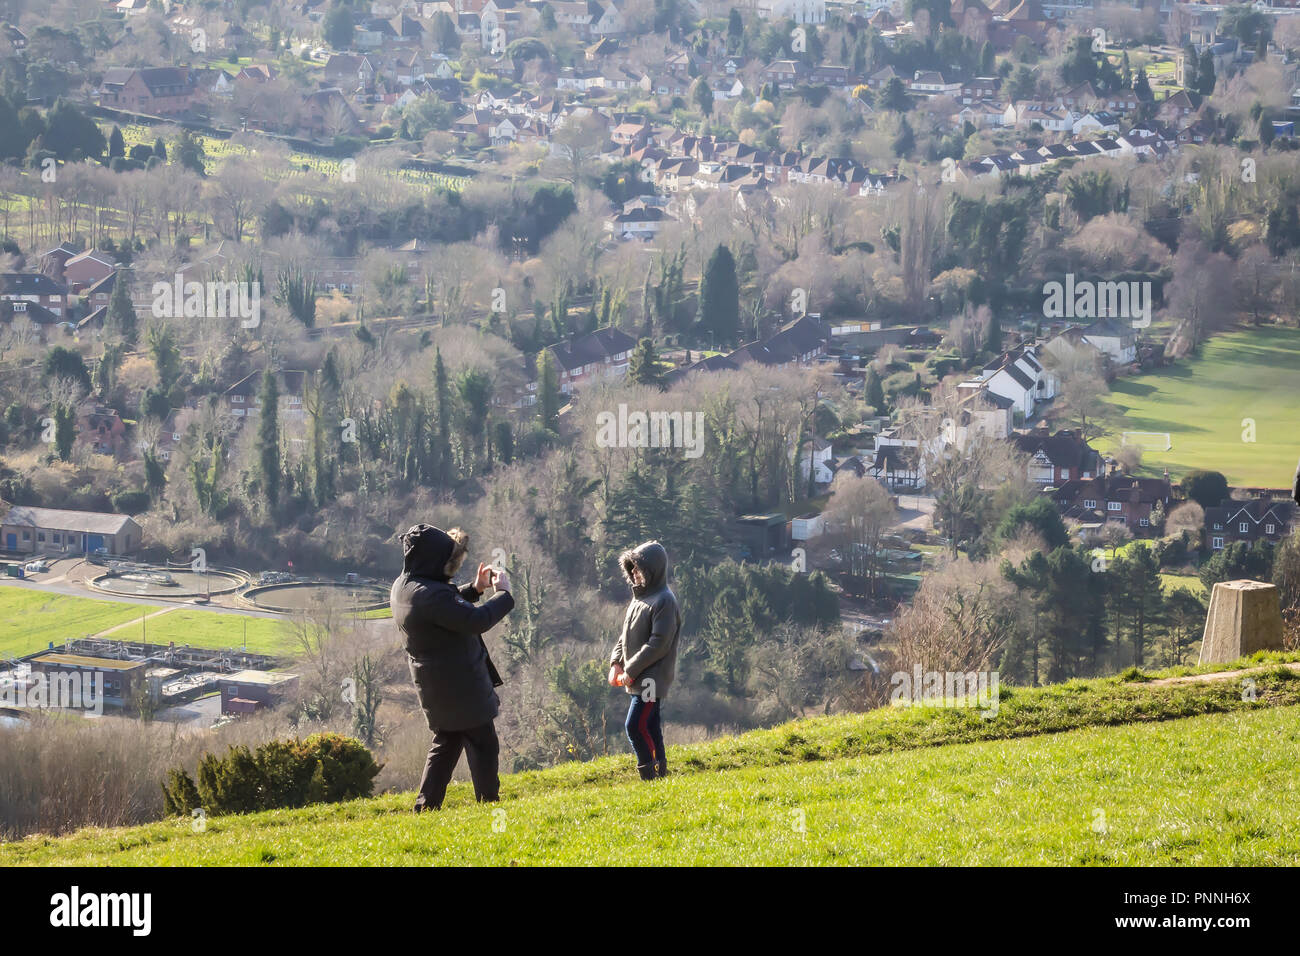 Box Hill near Reigate, Surrey, UK - April 2, 2018 - ? man takes a picture of his son with his smartphone camera; british countryside in the background Stock Photo